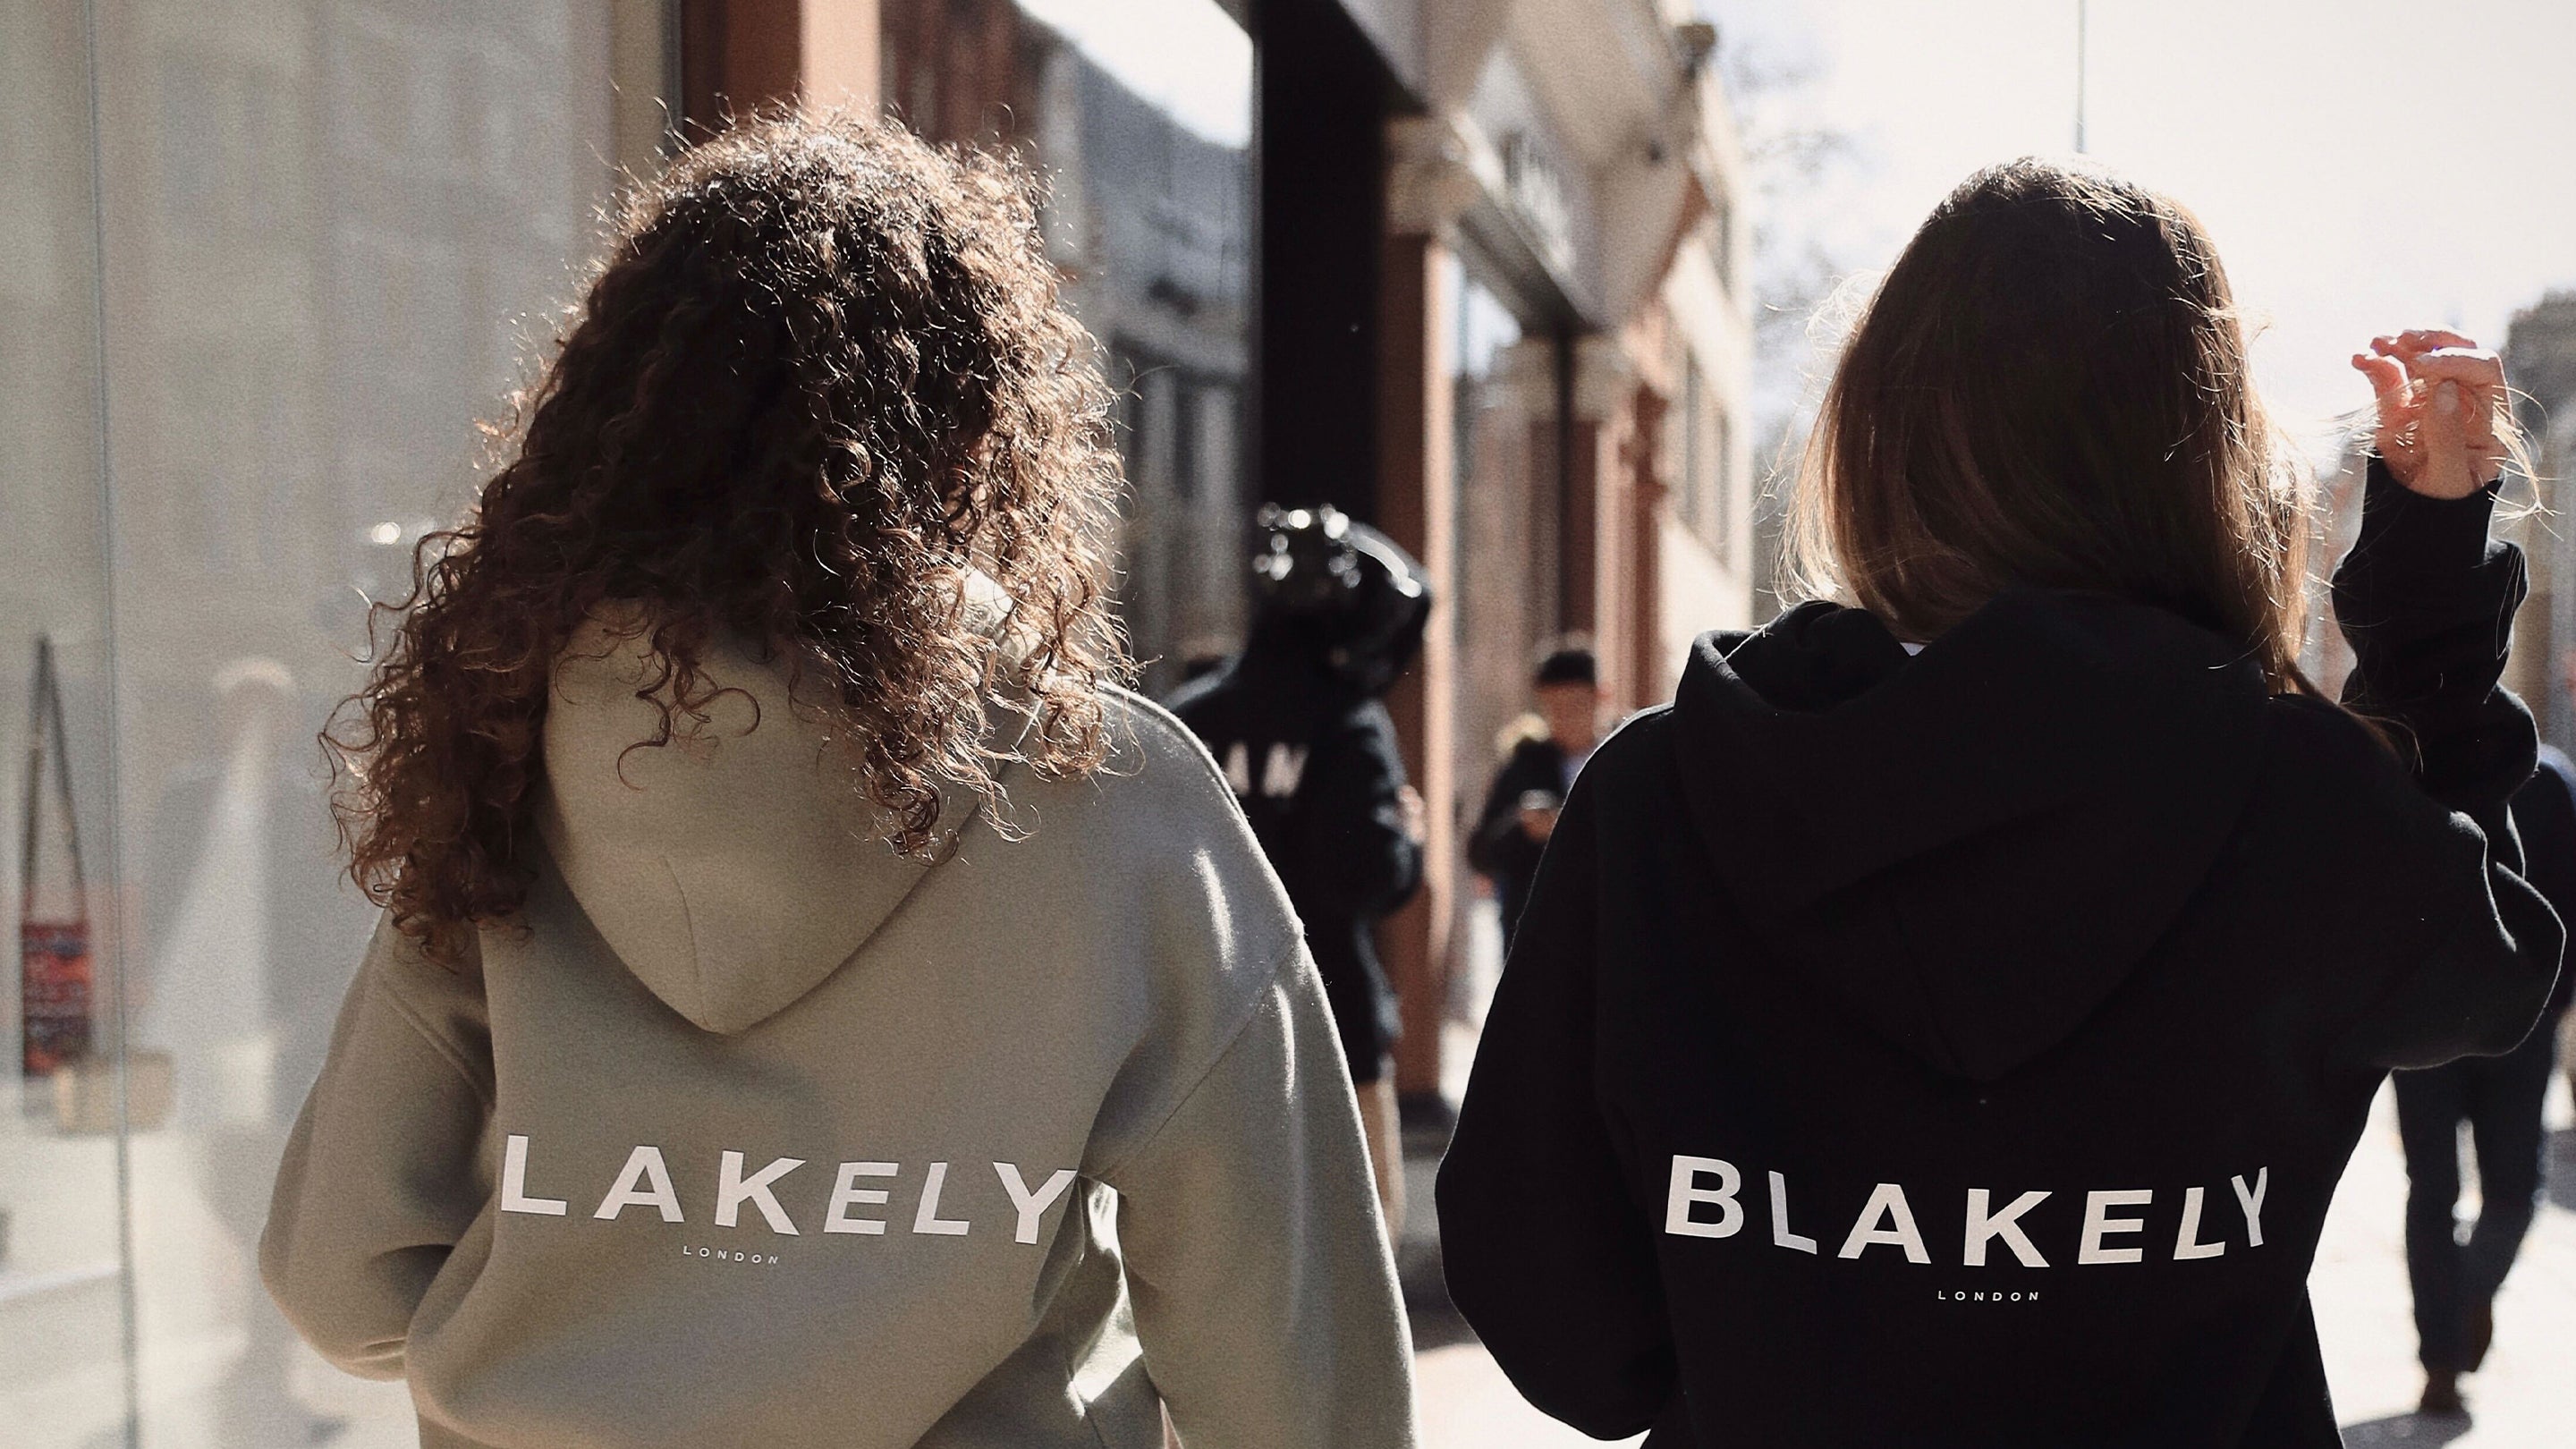 The Blakely London Collection